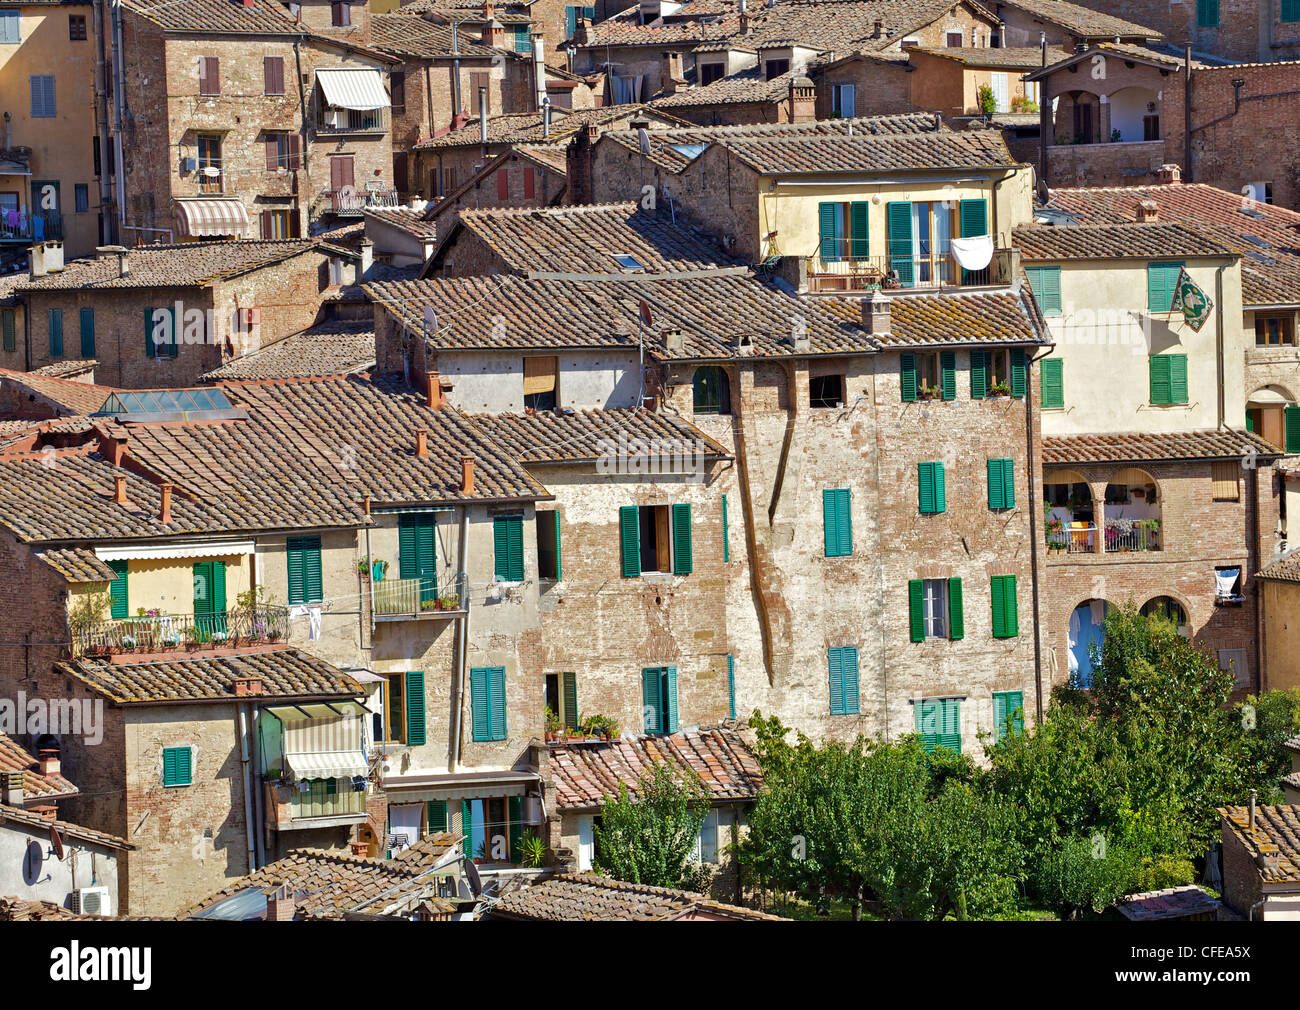 Typical Homes in Cortona on a Warm Sunny Day Stock Photo